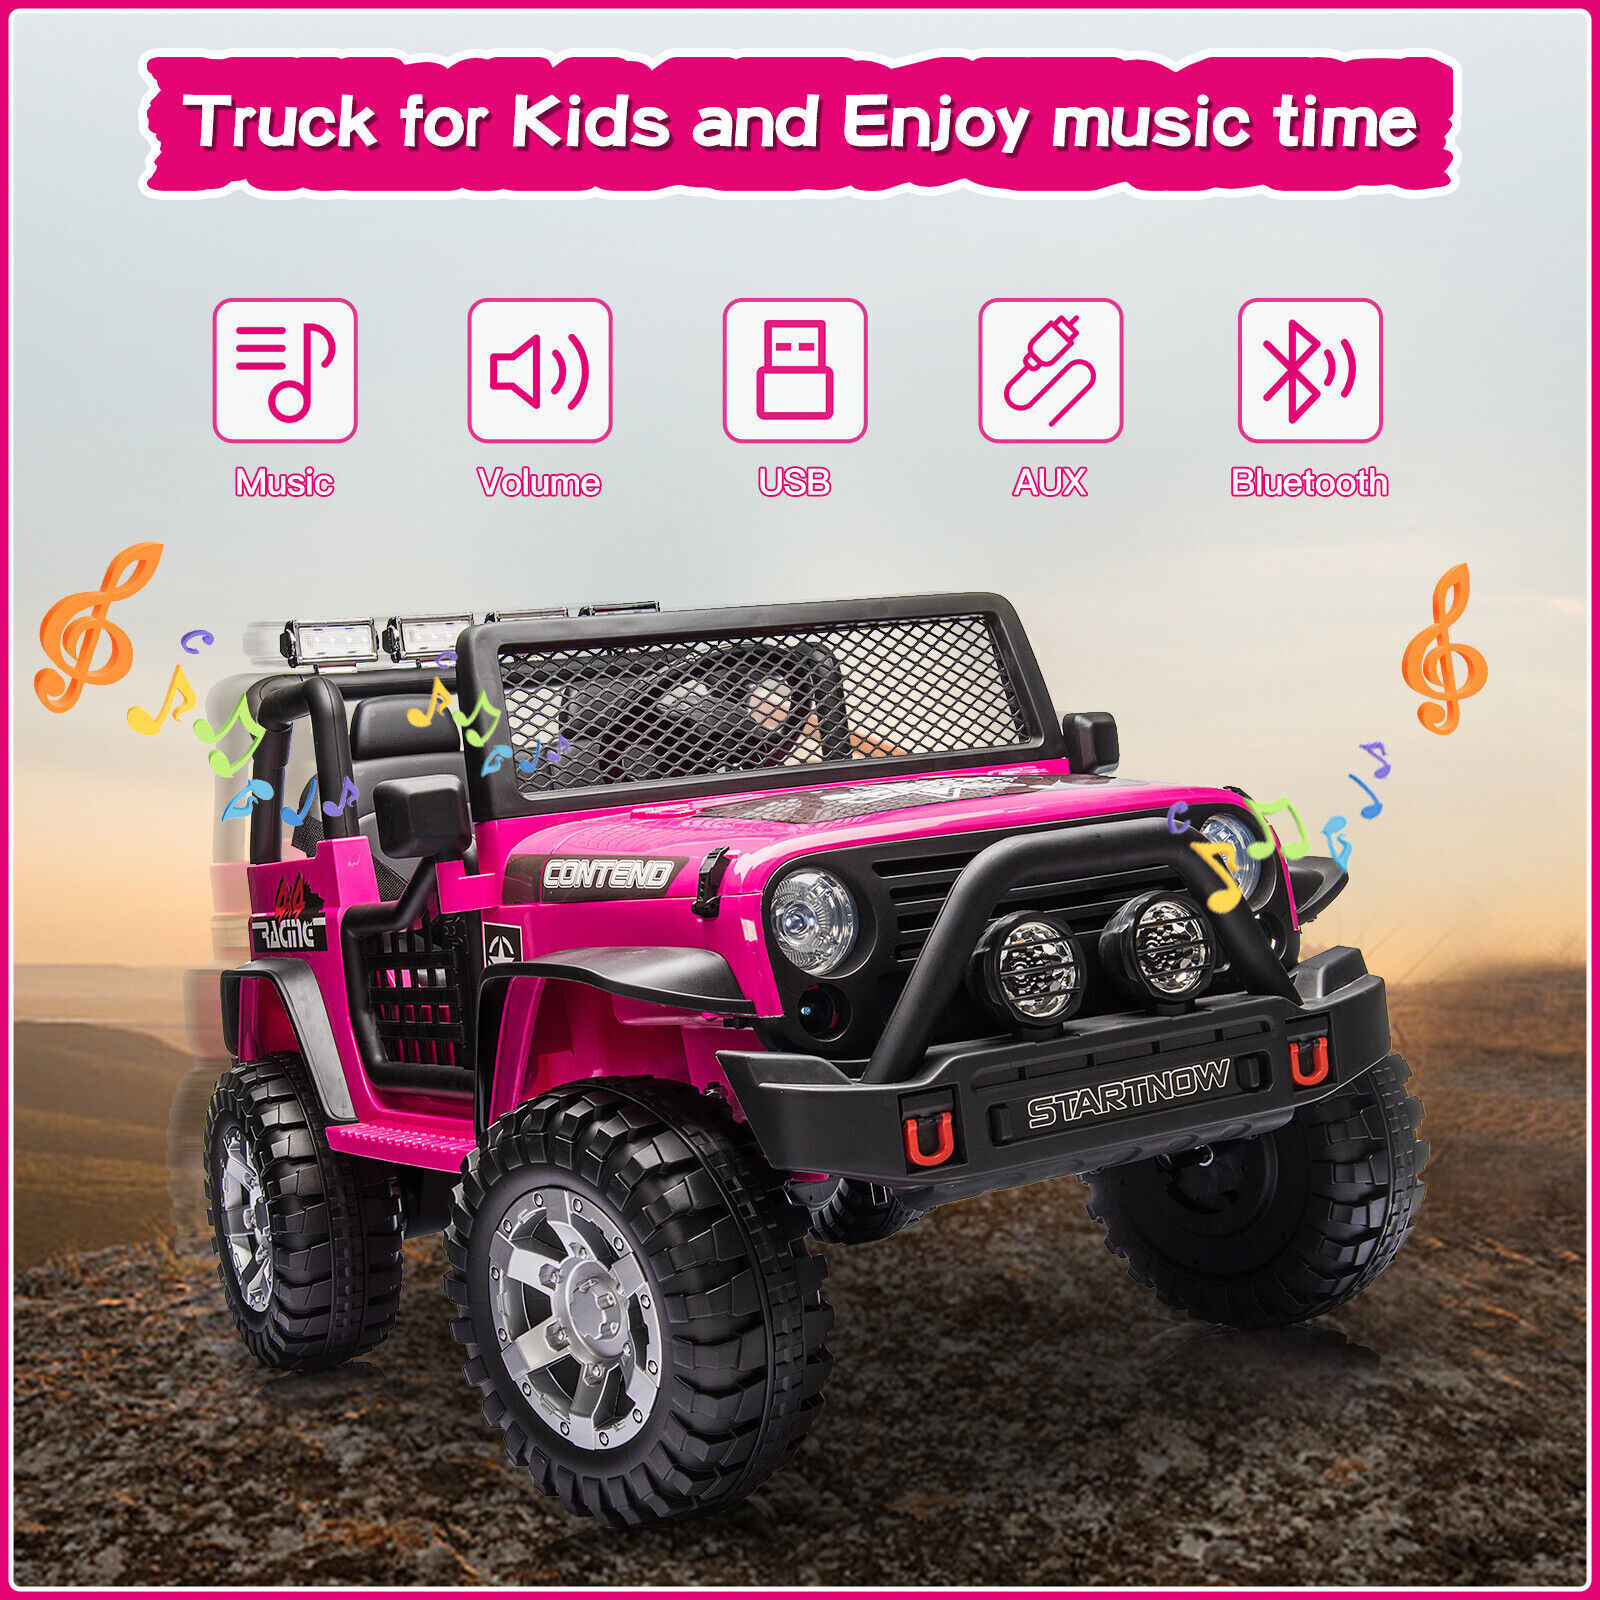 Dazone 12V Kids Ride on Jeep Car, Electric 2 Seats Off-road Jeep Ride on Truck Vehicle with Remote Control, LED Lights, MP3 Music, Pink - image 2 of 8